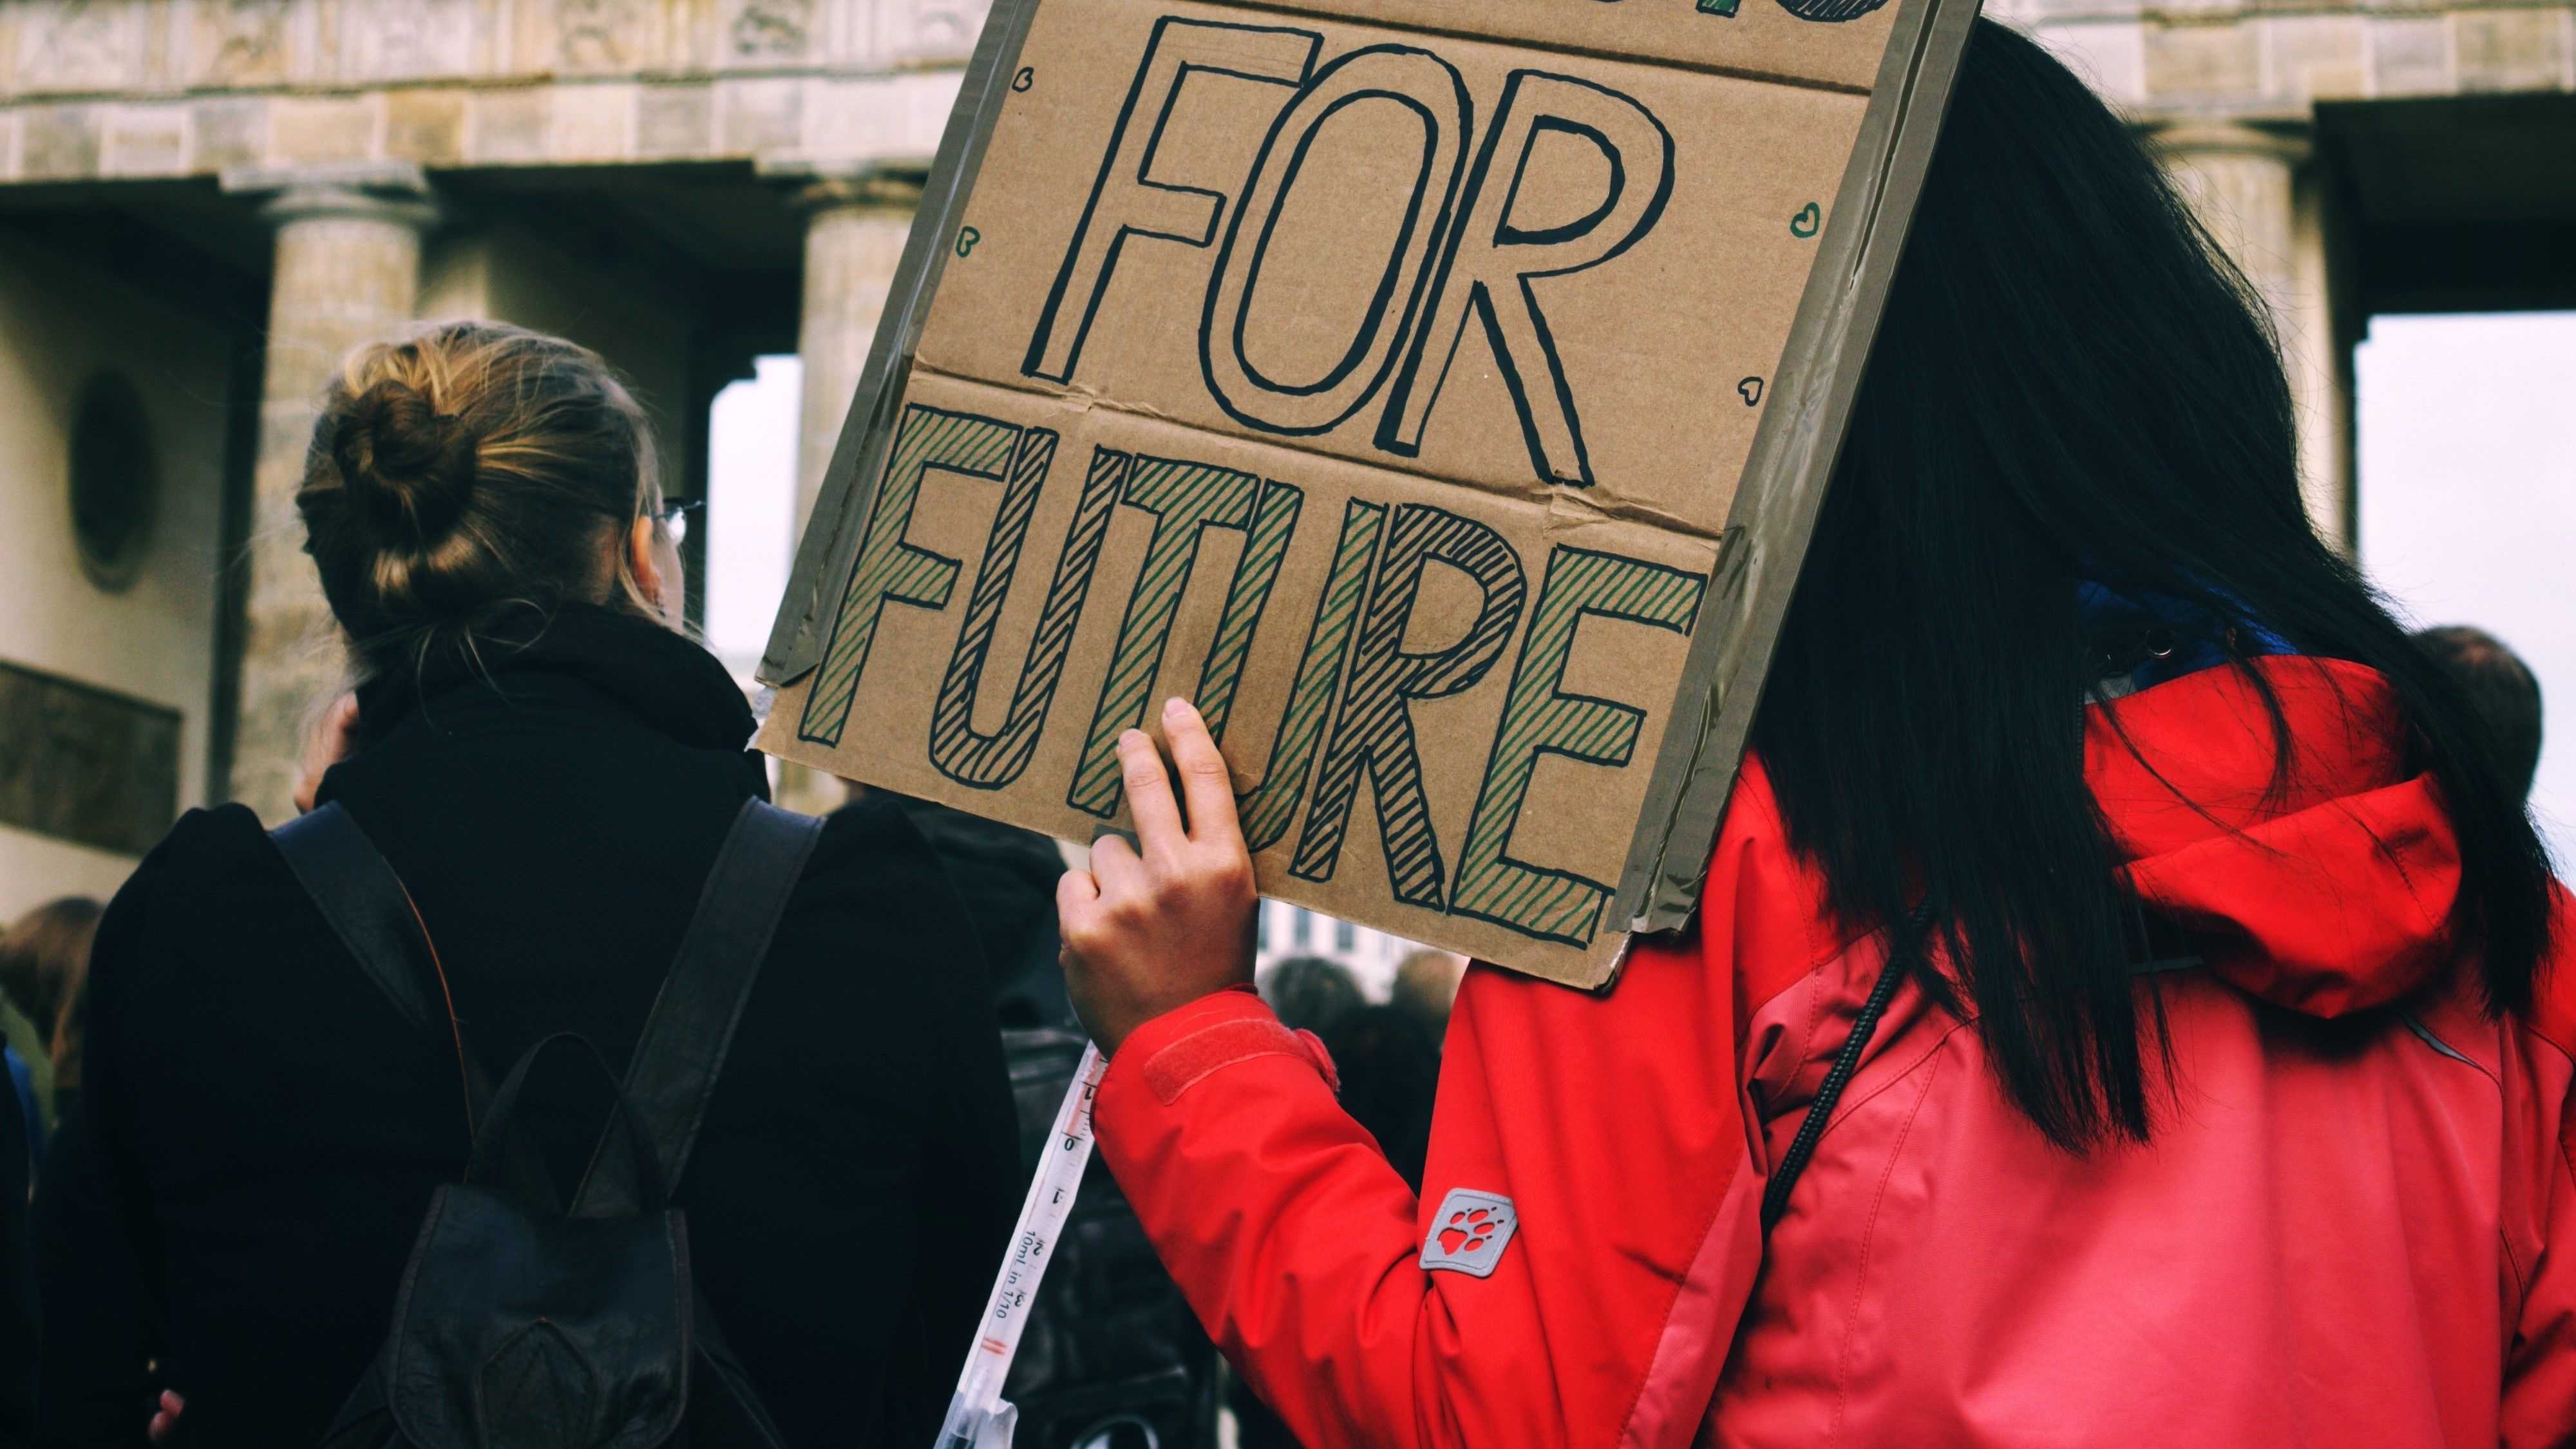 A person is hoding a selmade protest slogan on which "For Future" is written.